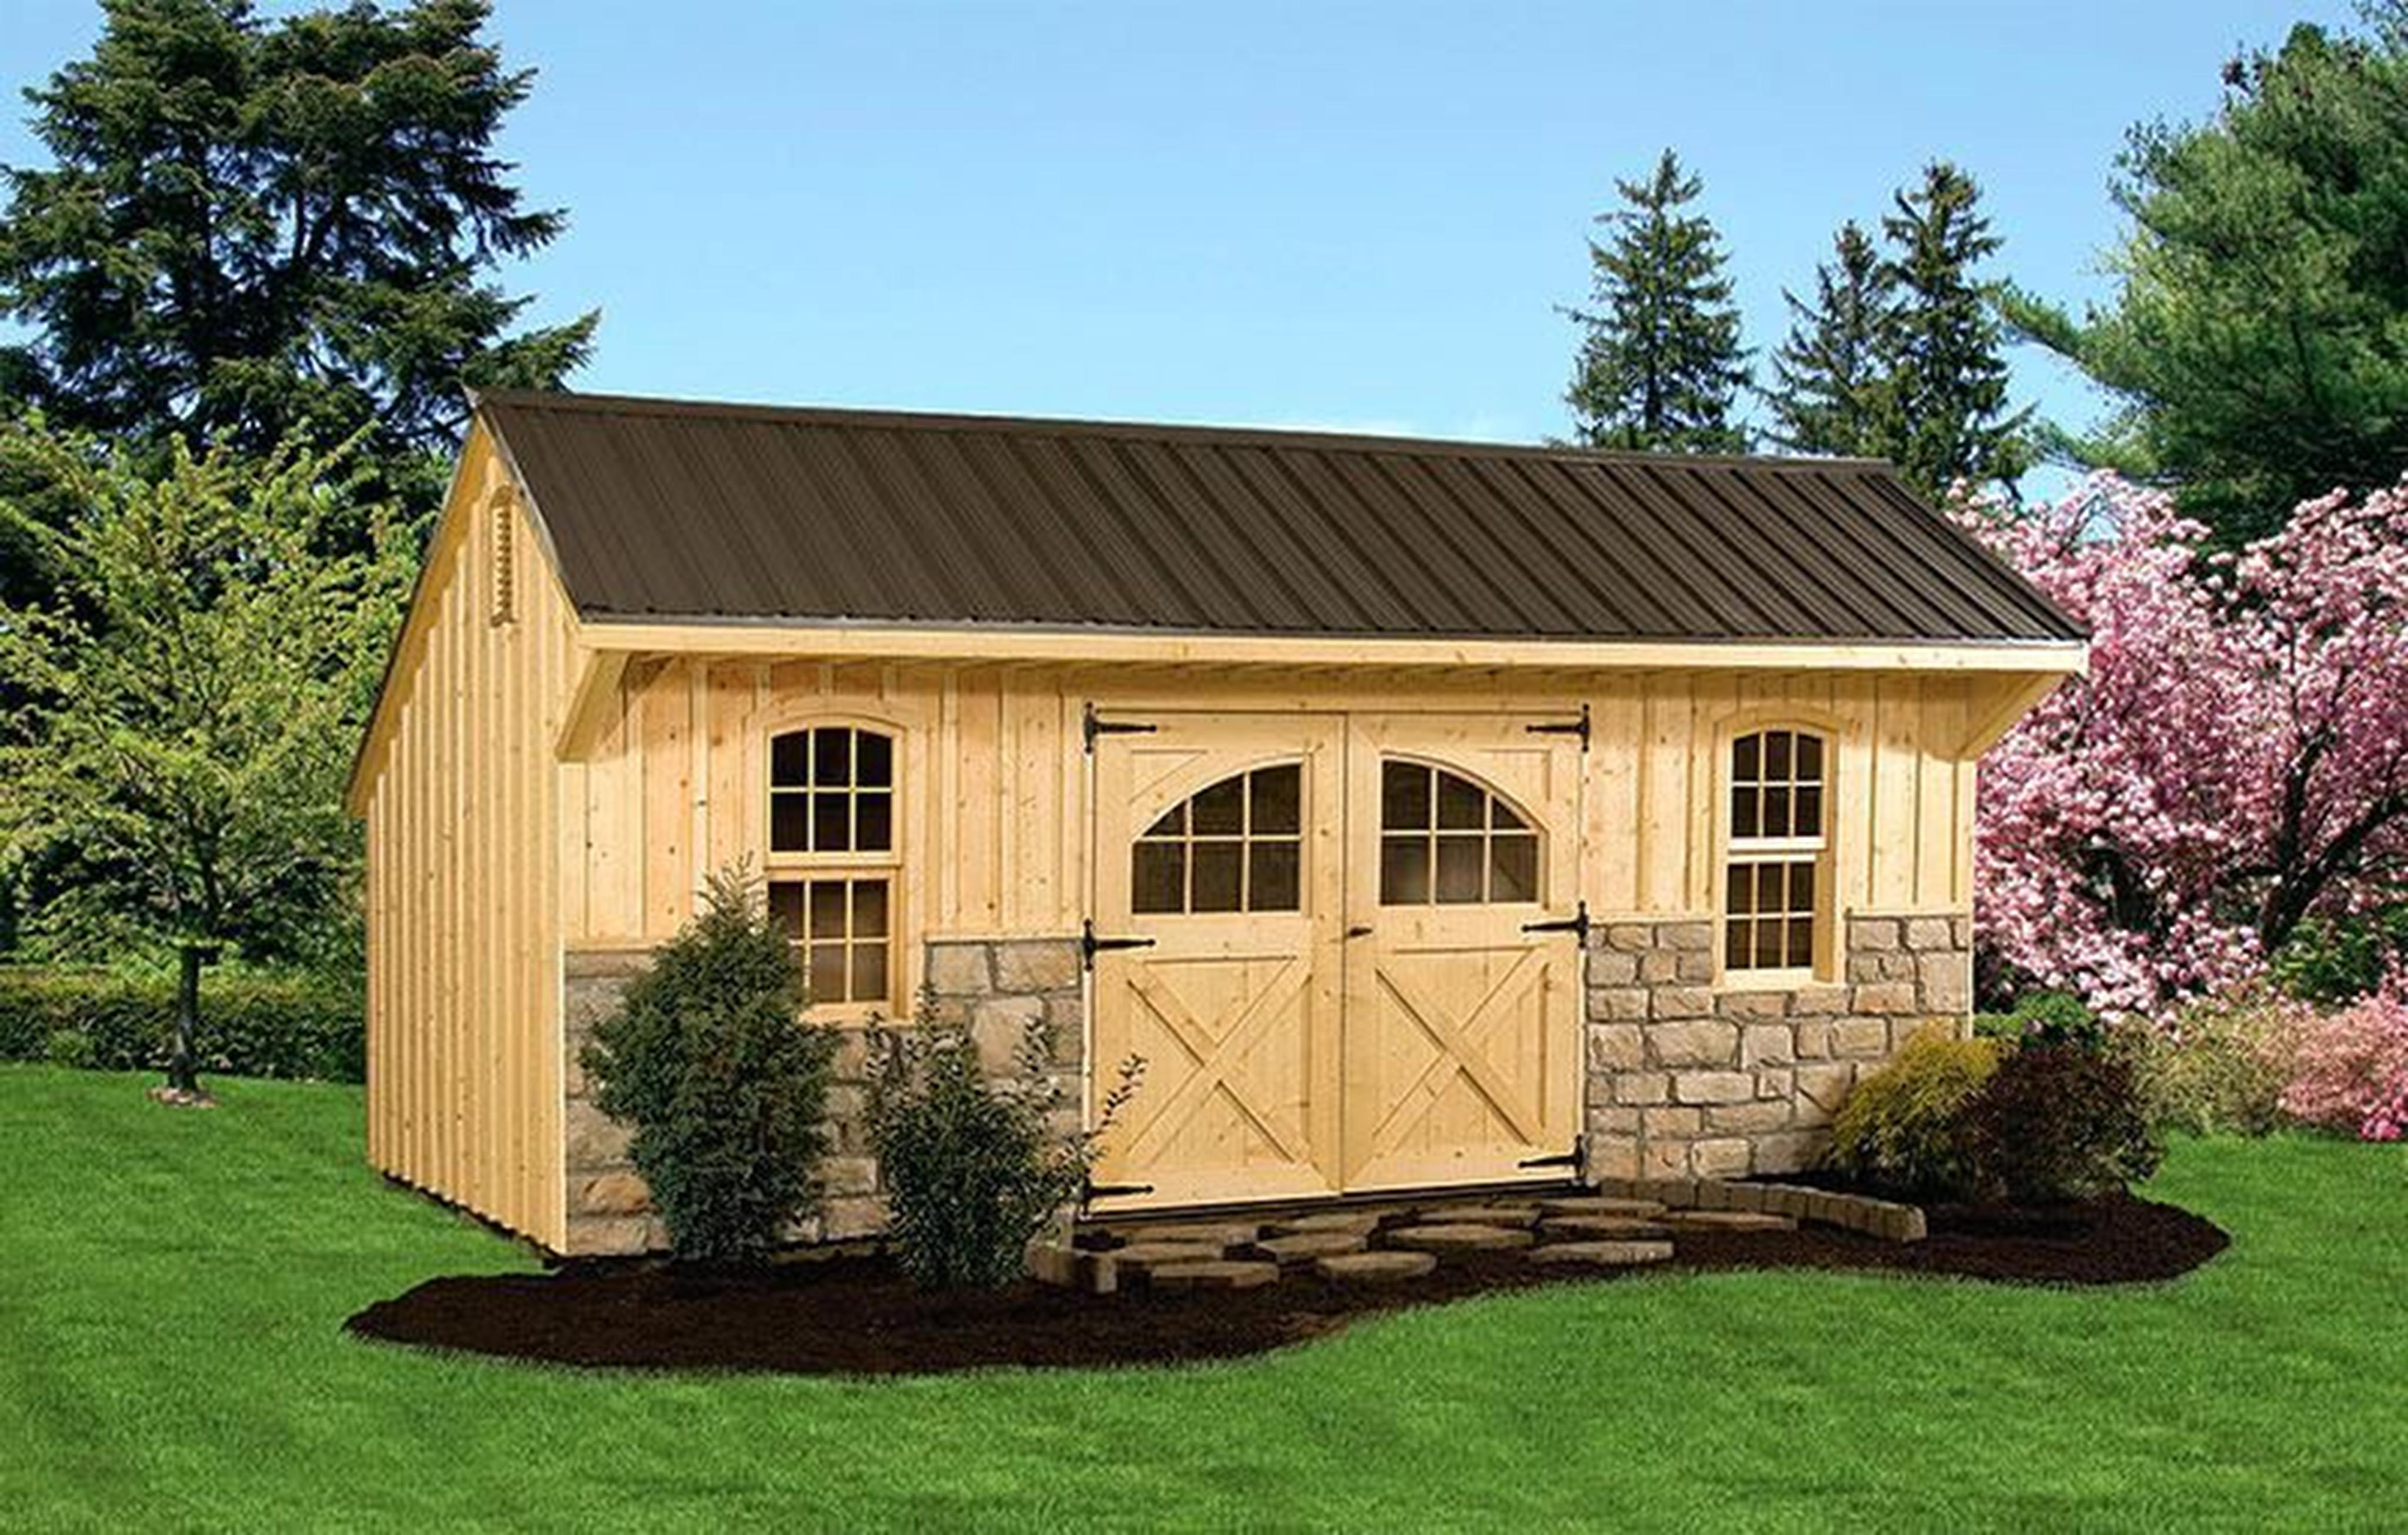 47129 New Garden Shed And Brick Brick Storage Shed Ideas Brick Shed within size 4096 X 2611